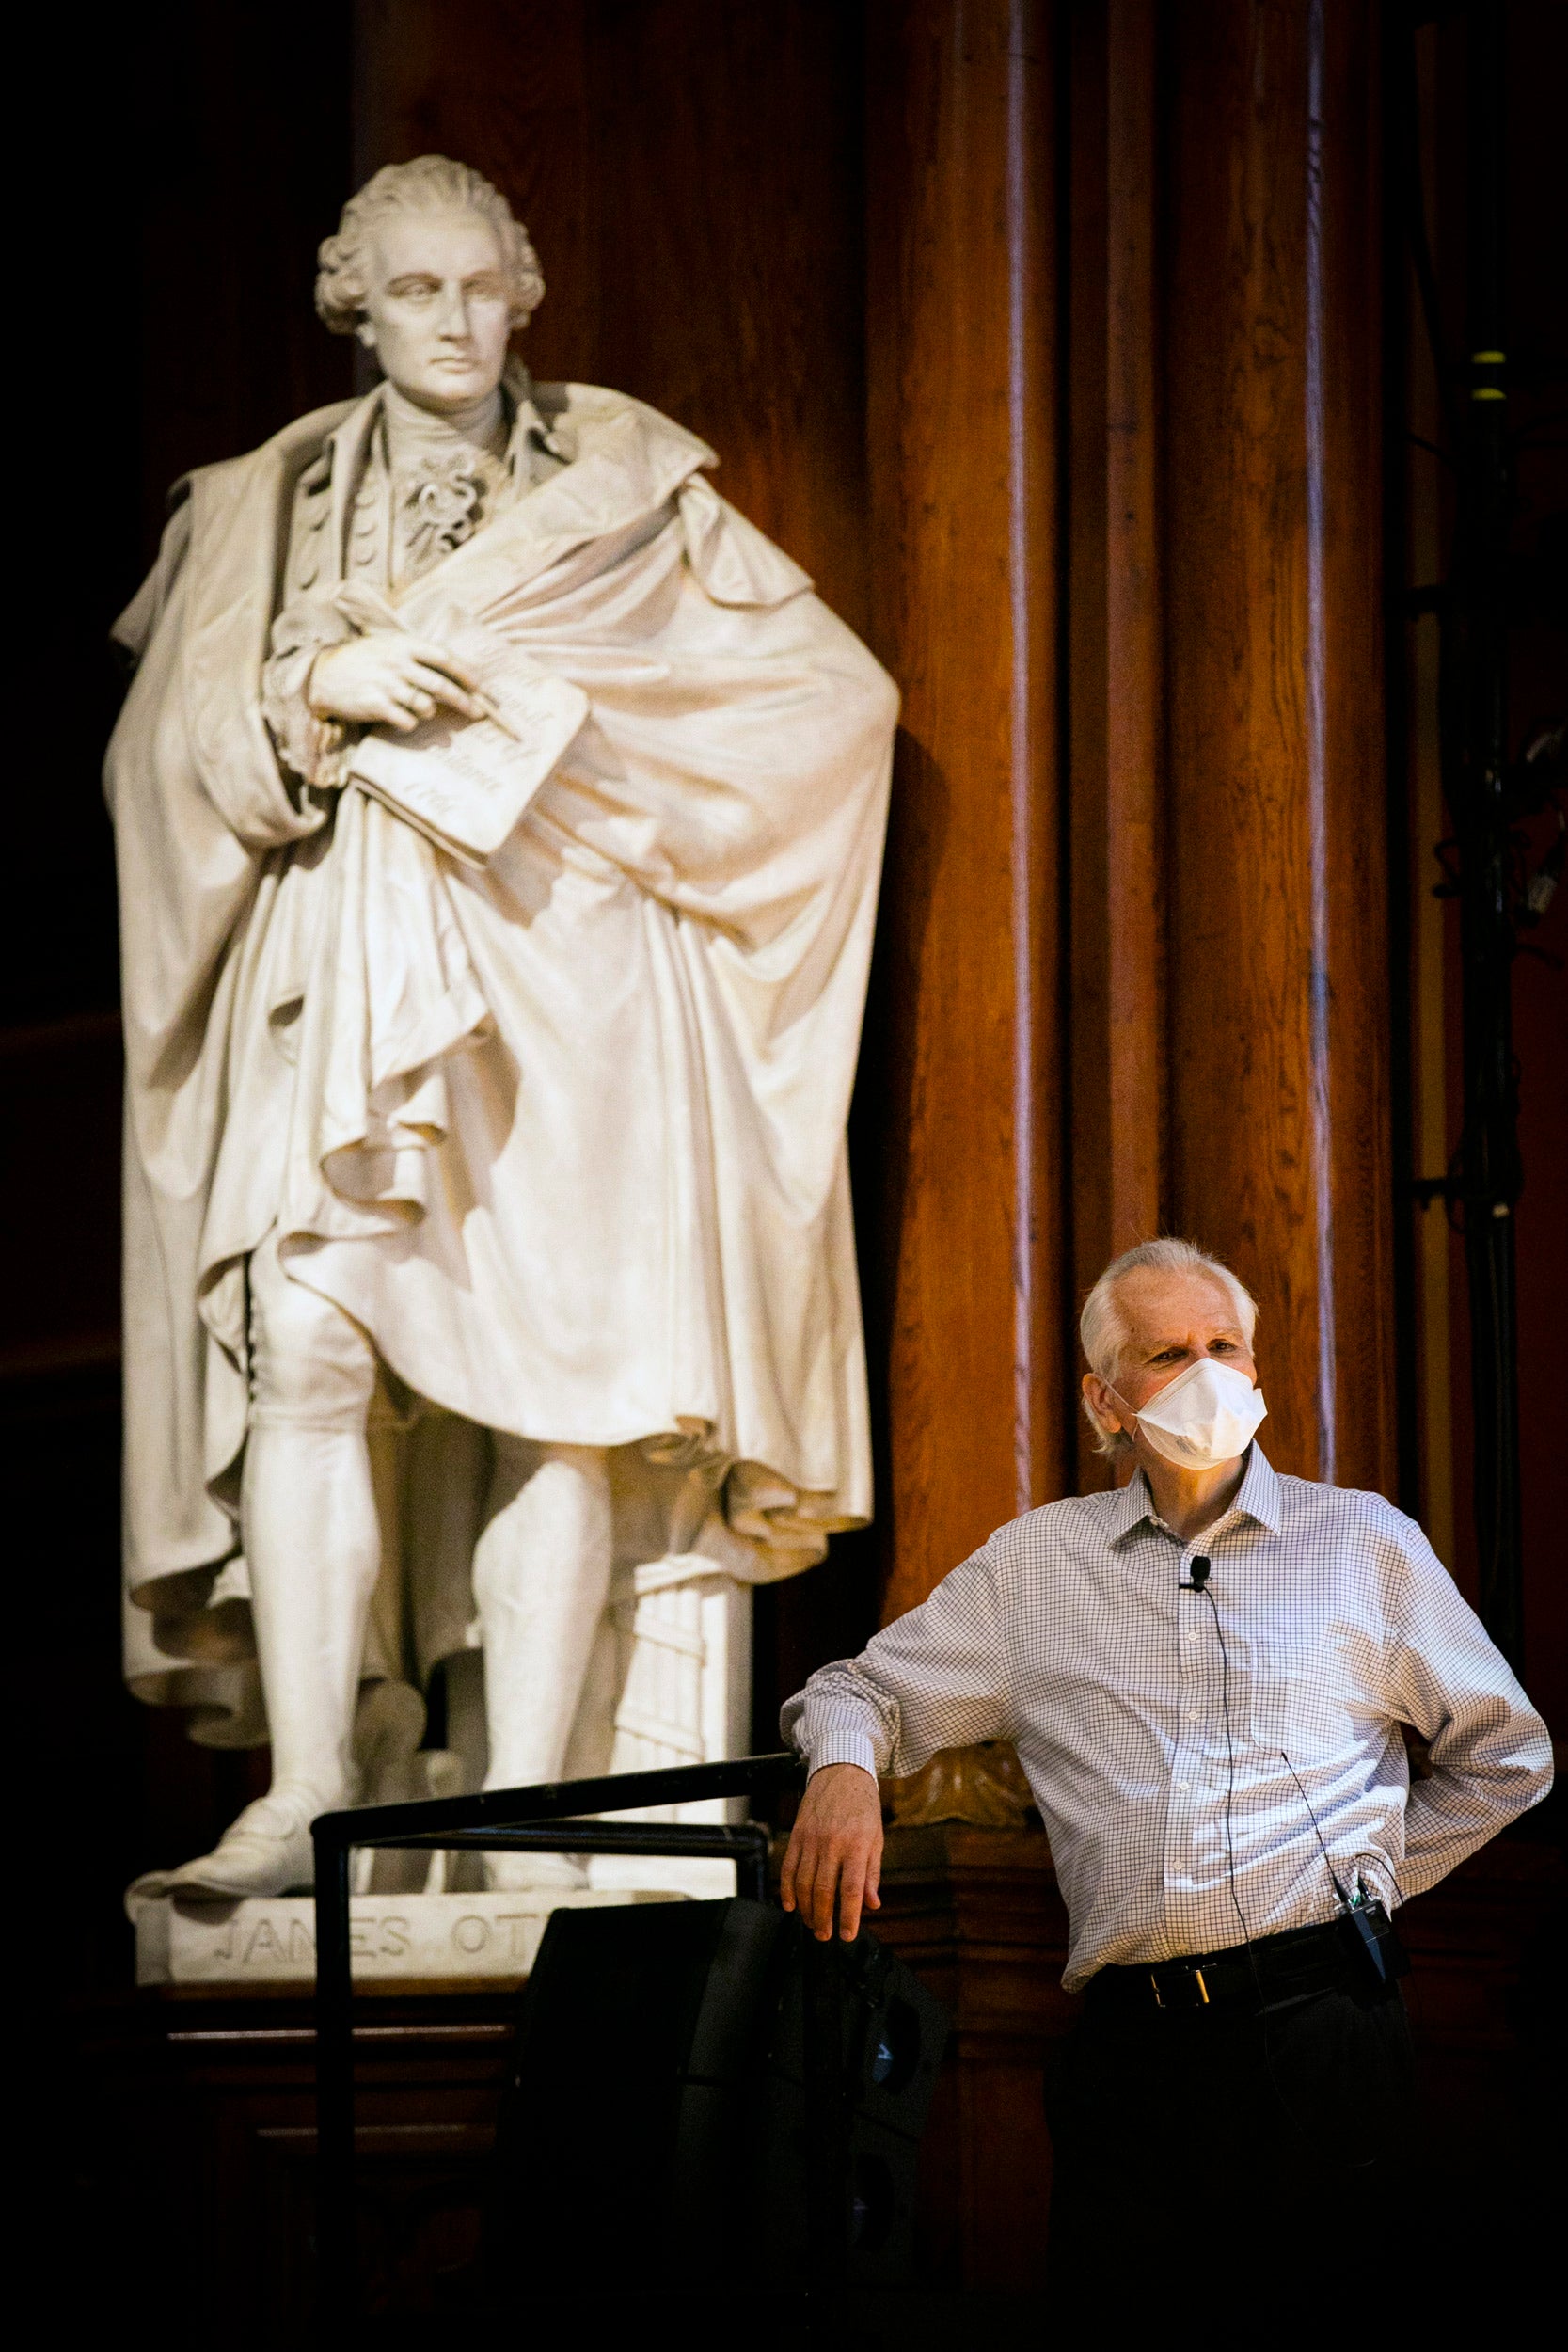 Charles Czeisler stands by the statue in Sanders Theatre during his lecture on Sleep.